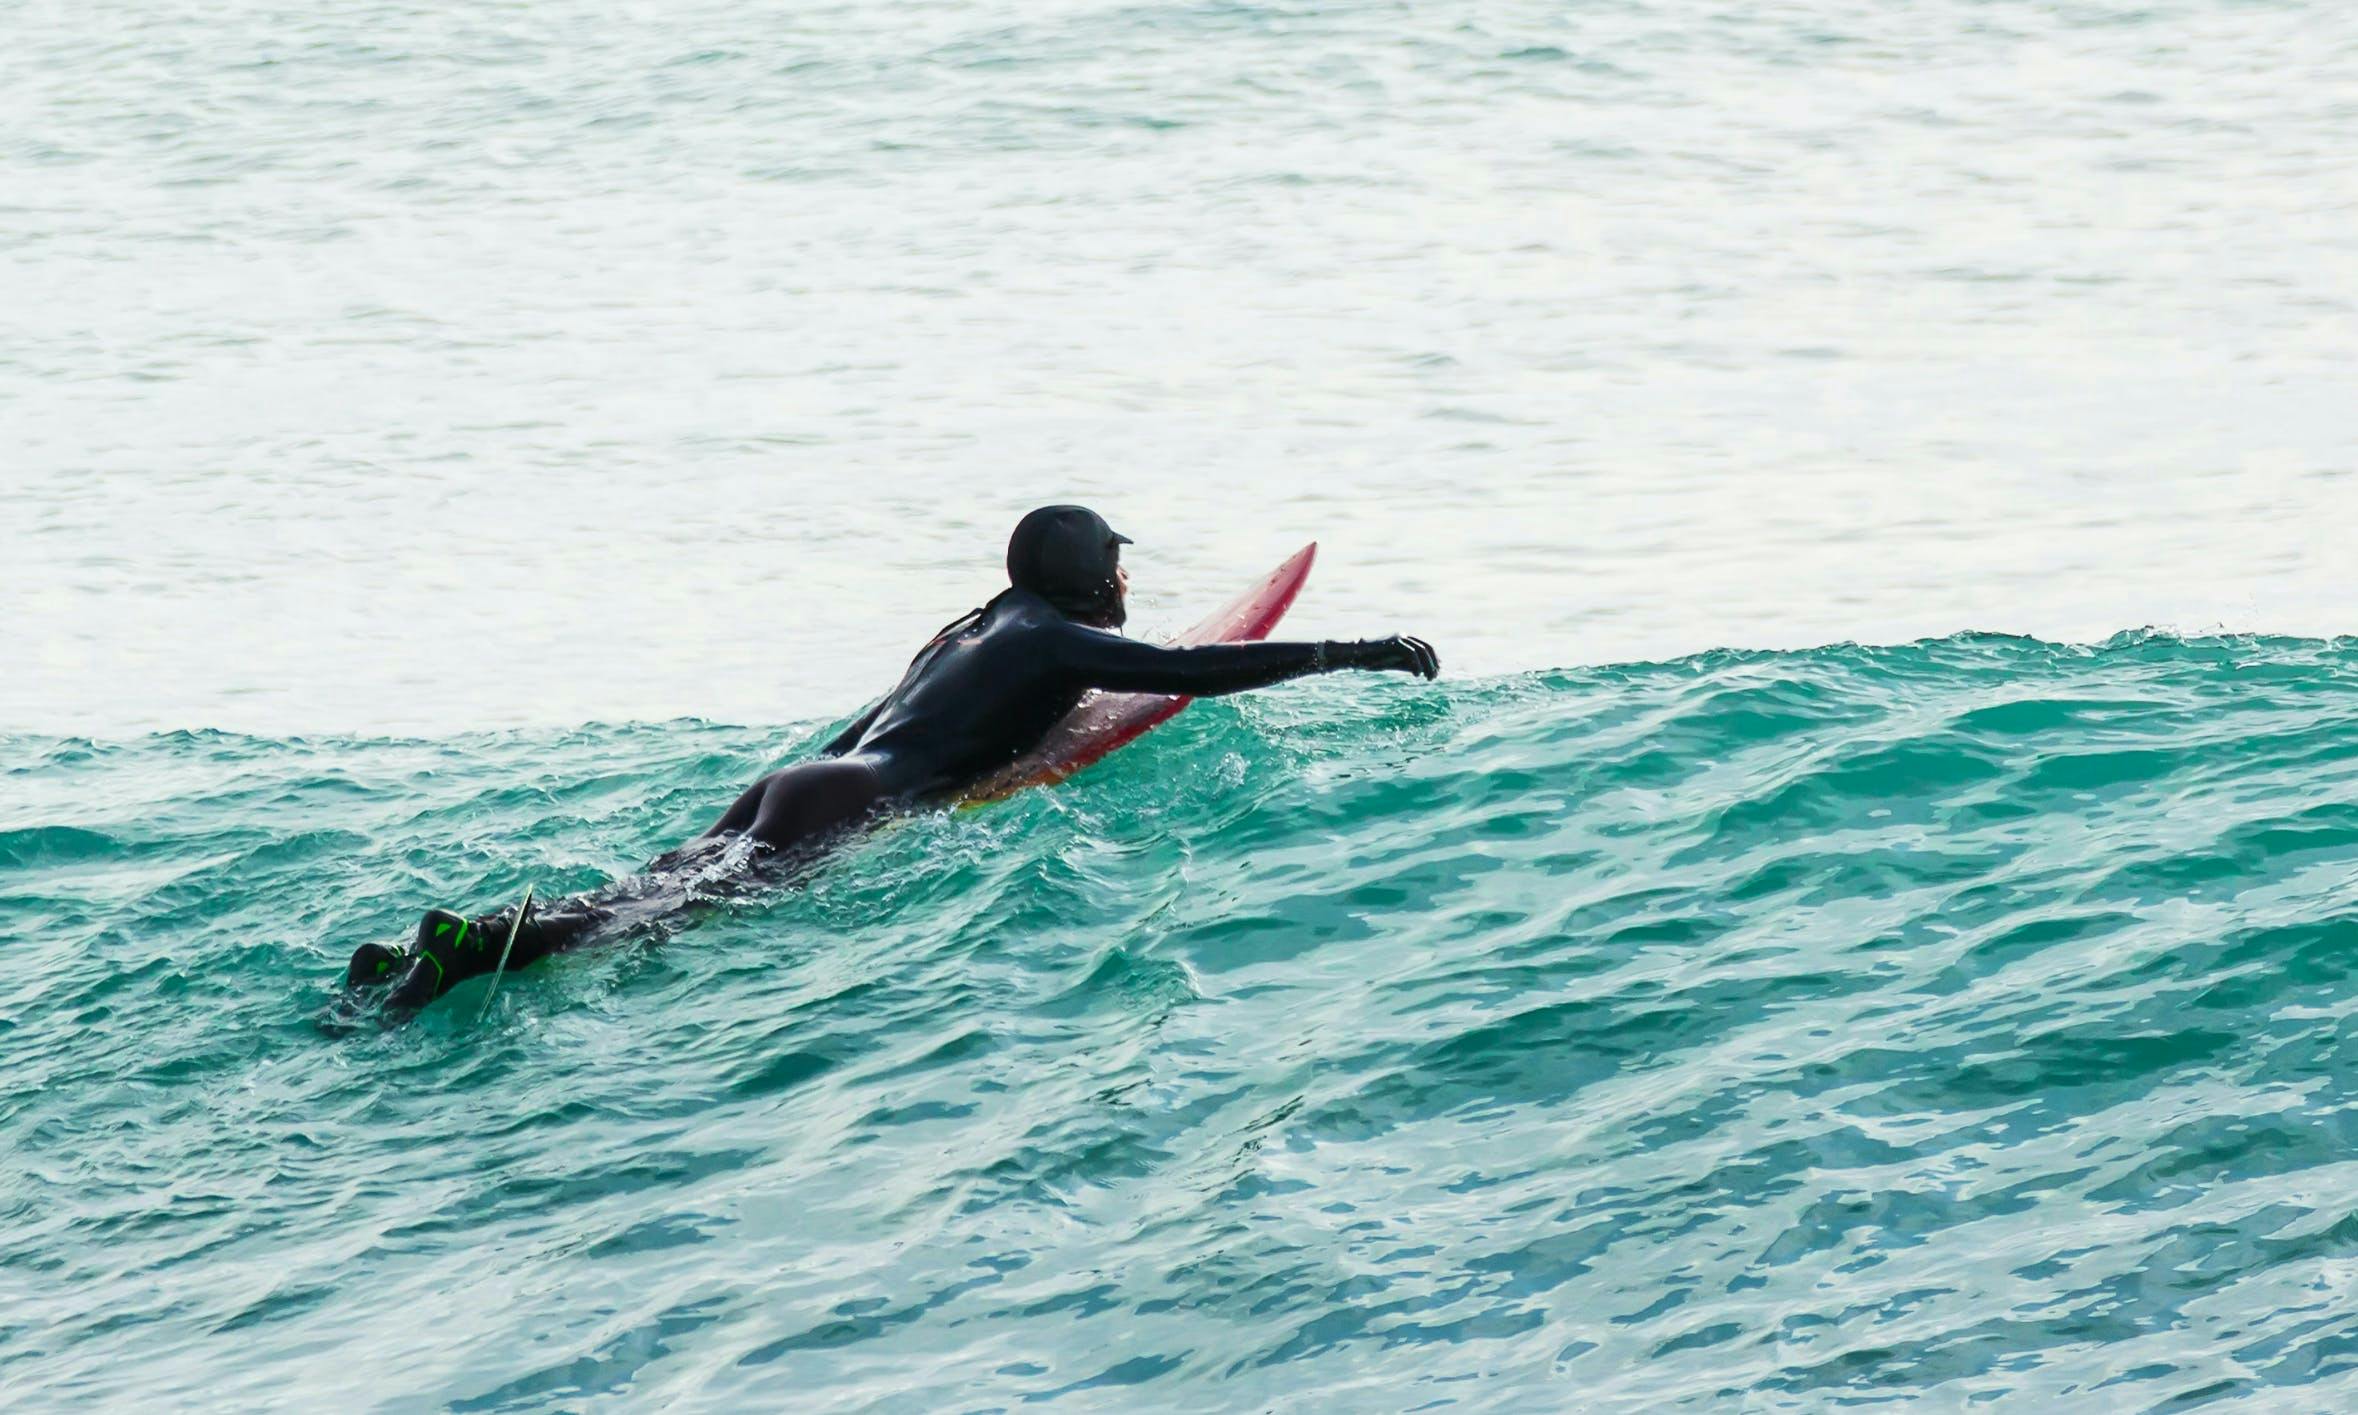 Surfer wearing hood, gloves, booties and wetsuit on a wave